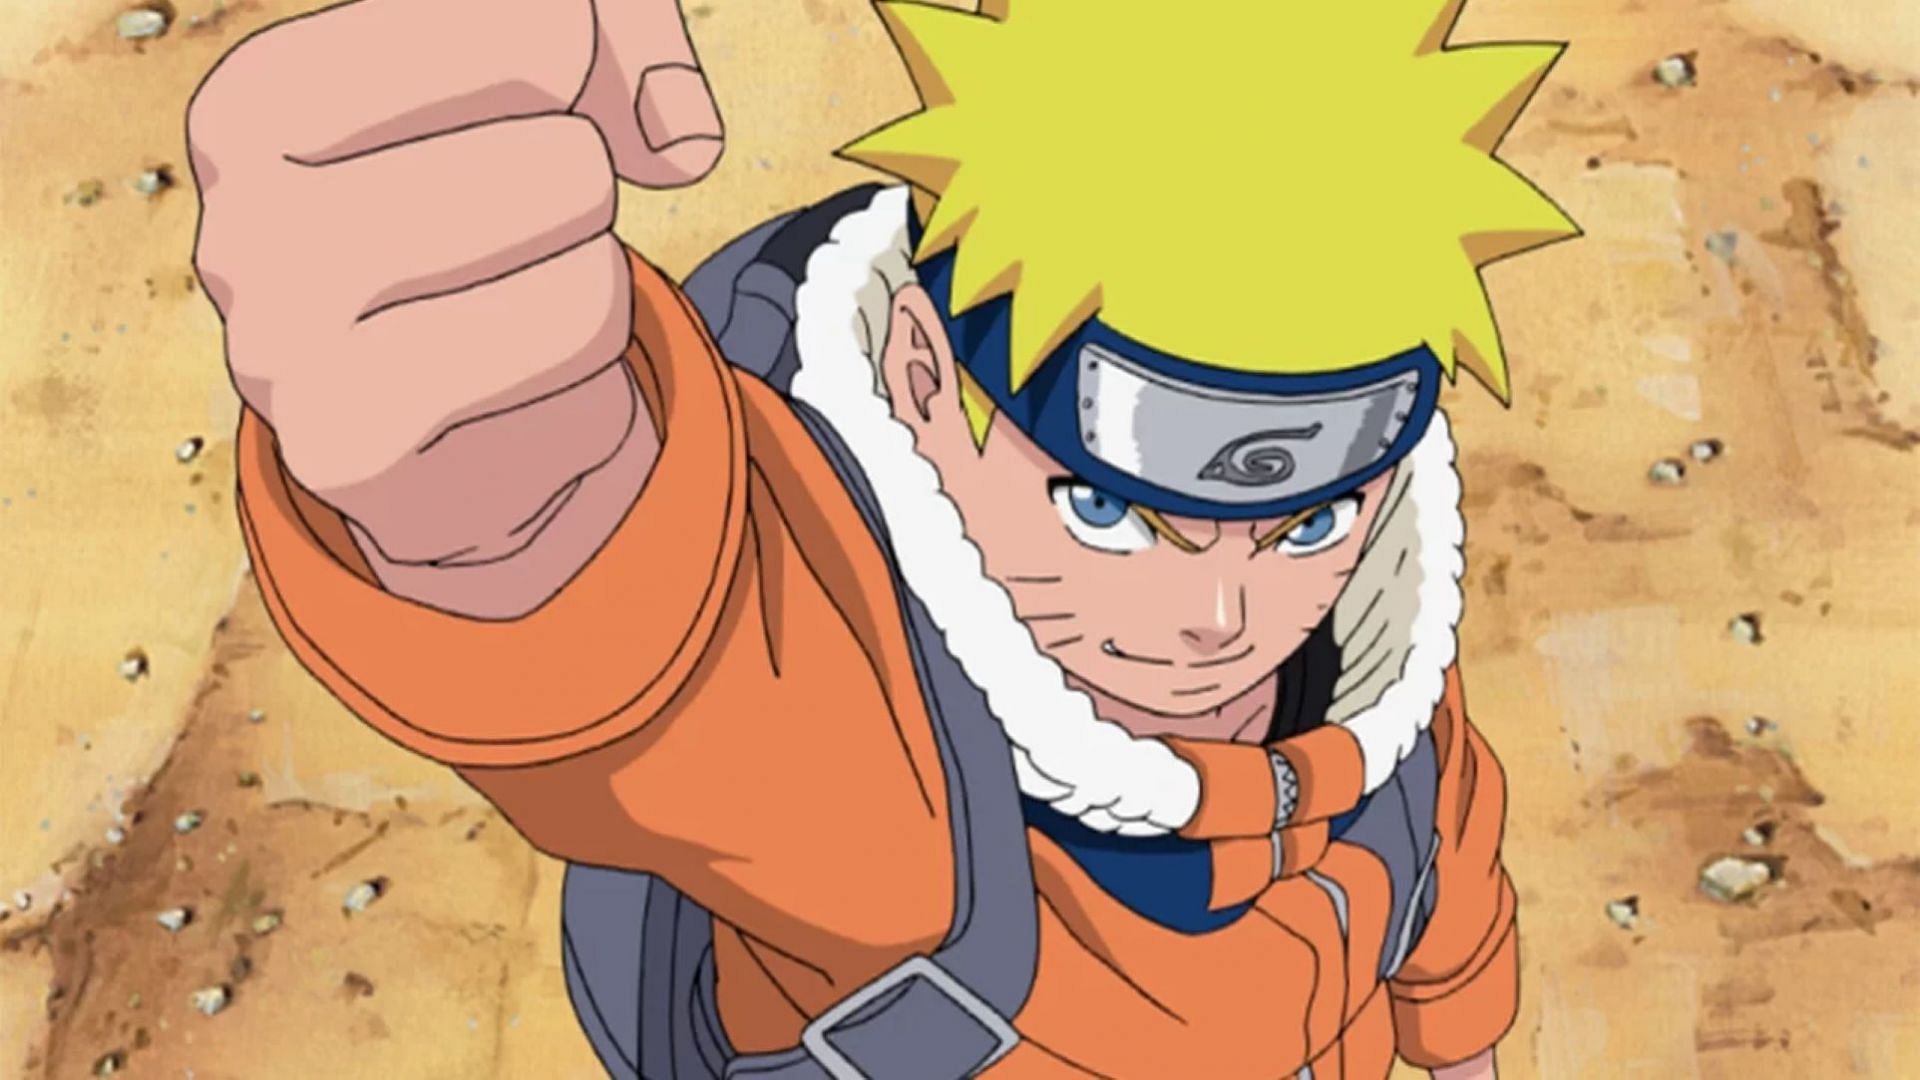 Road of Naruto celebrates 20th anniversary of beloved anime with  reanimated iconic scenes